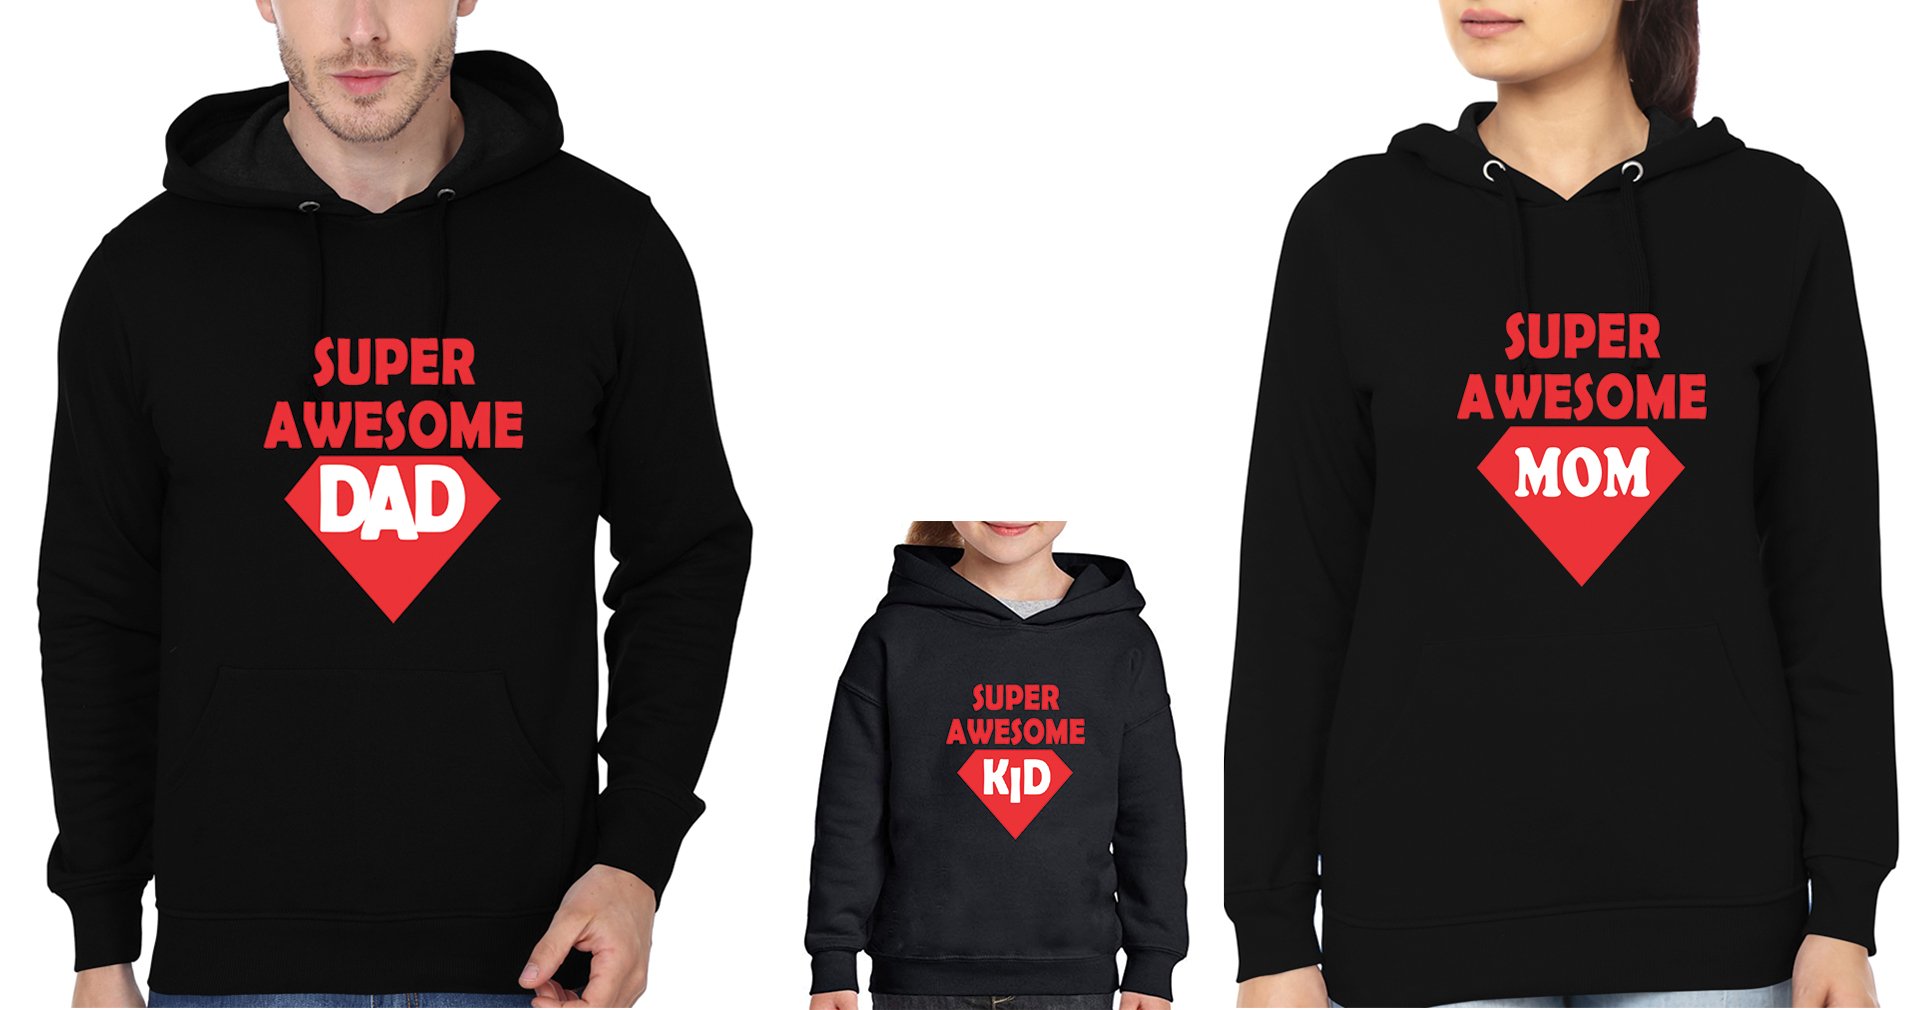 Super awesome dad Mom baby Family Hoodies-FunkyTradition